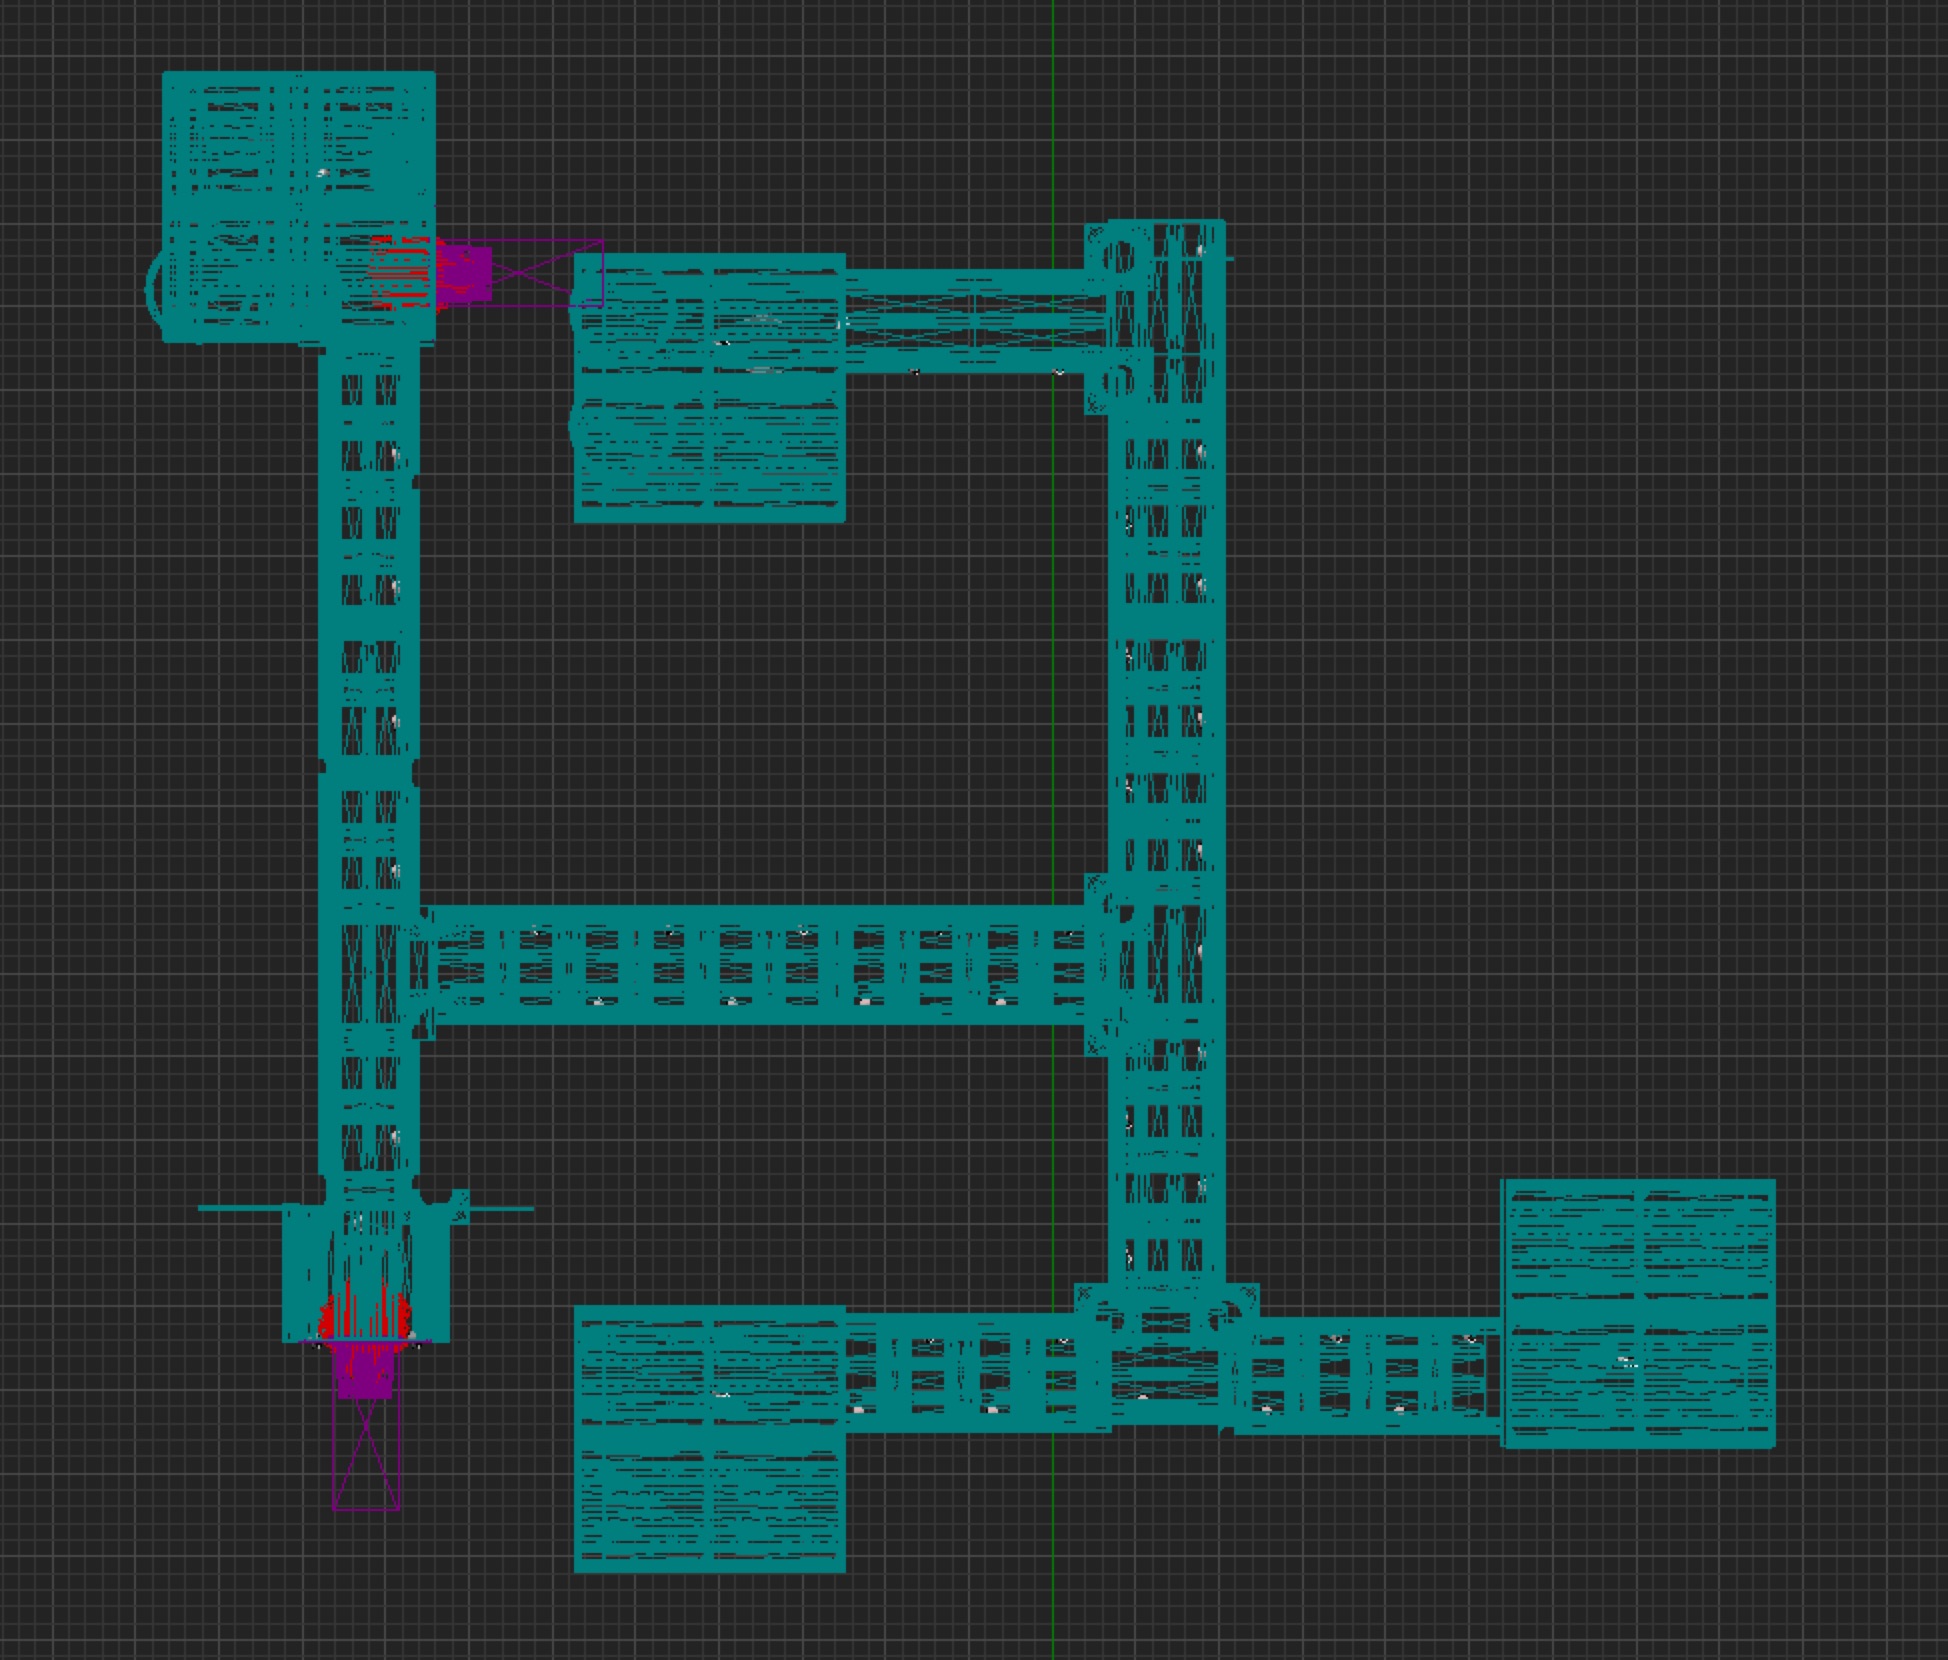 An orthographic view of just the upper level of the map.